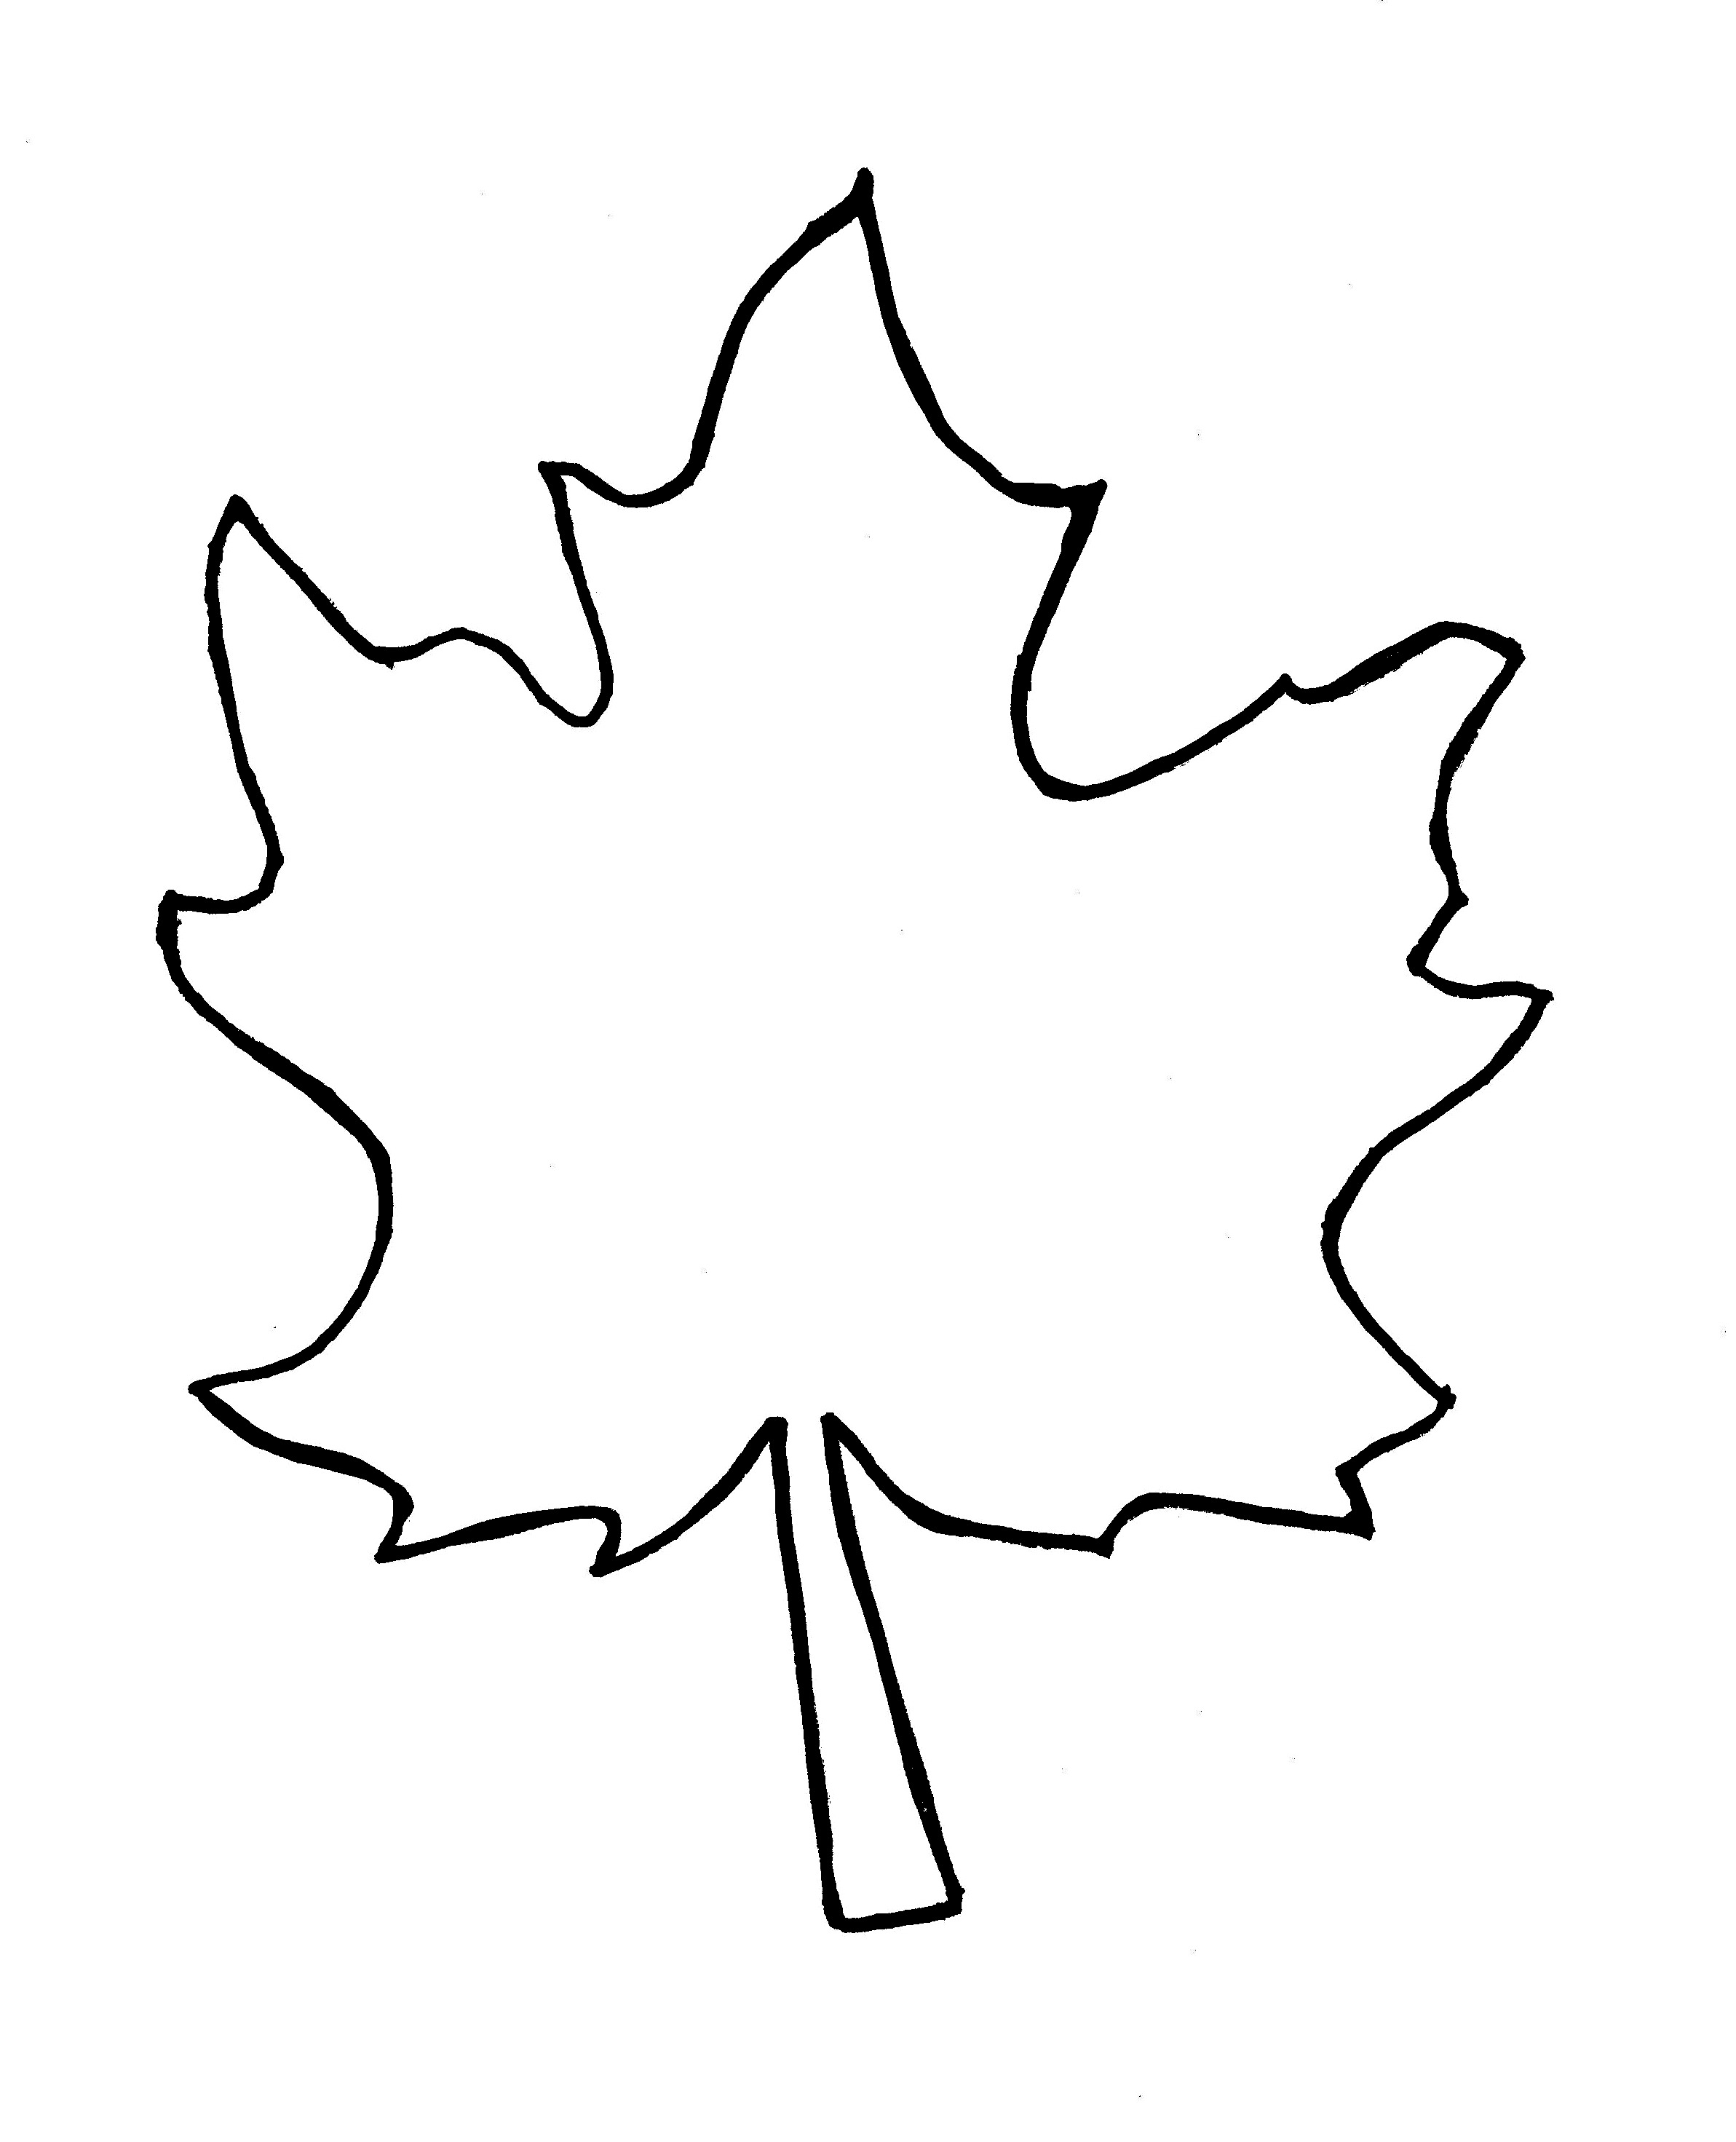 Leaf template clipart